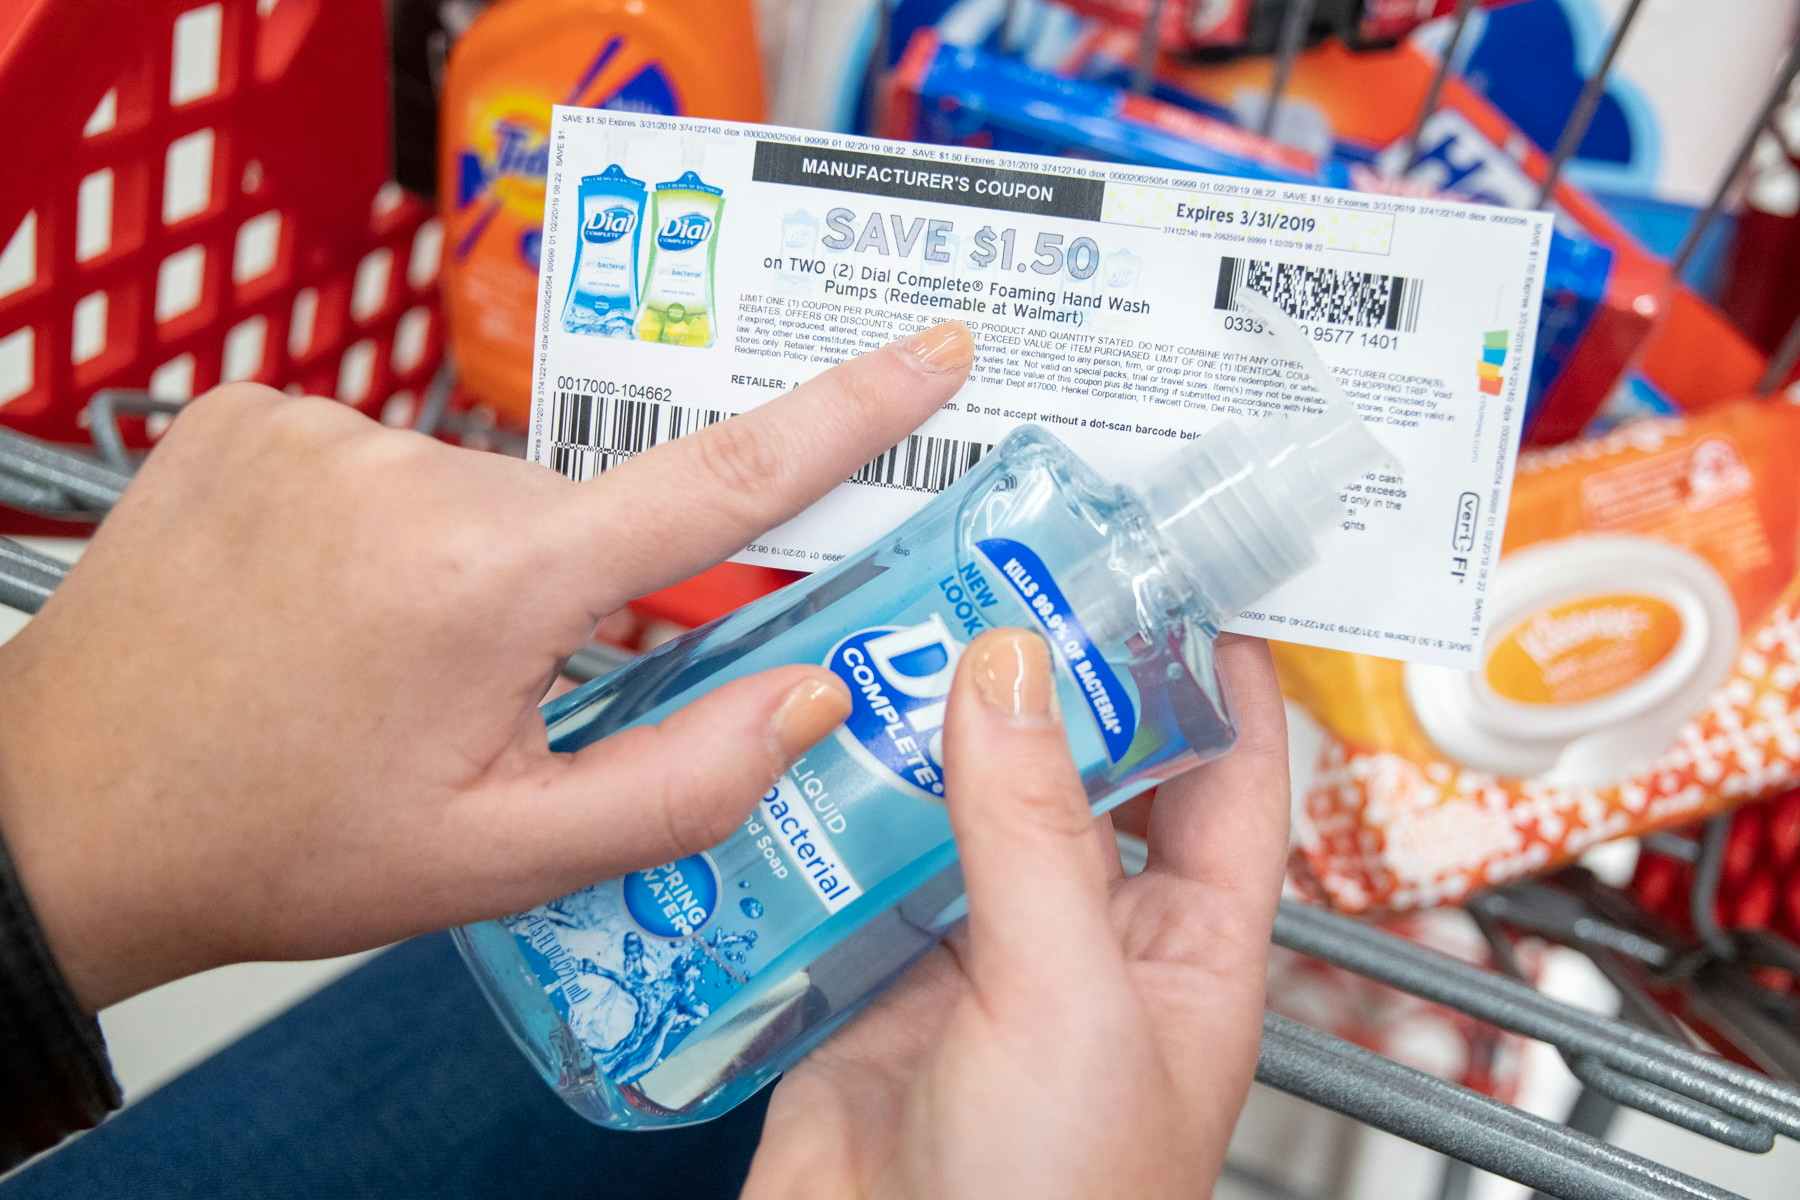 Woman pointing out fine print on coupon while holding a bottle of hand soap